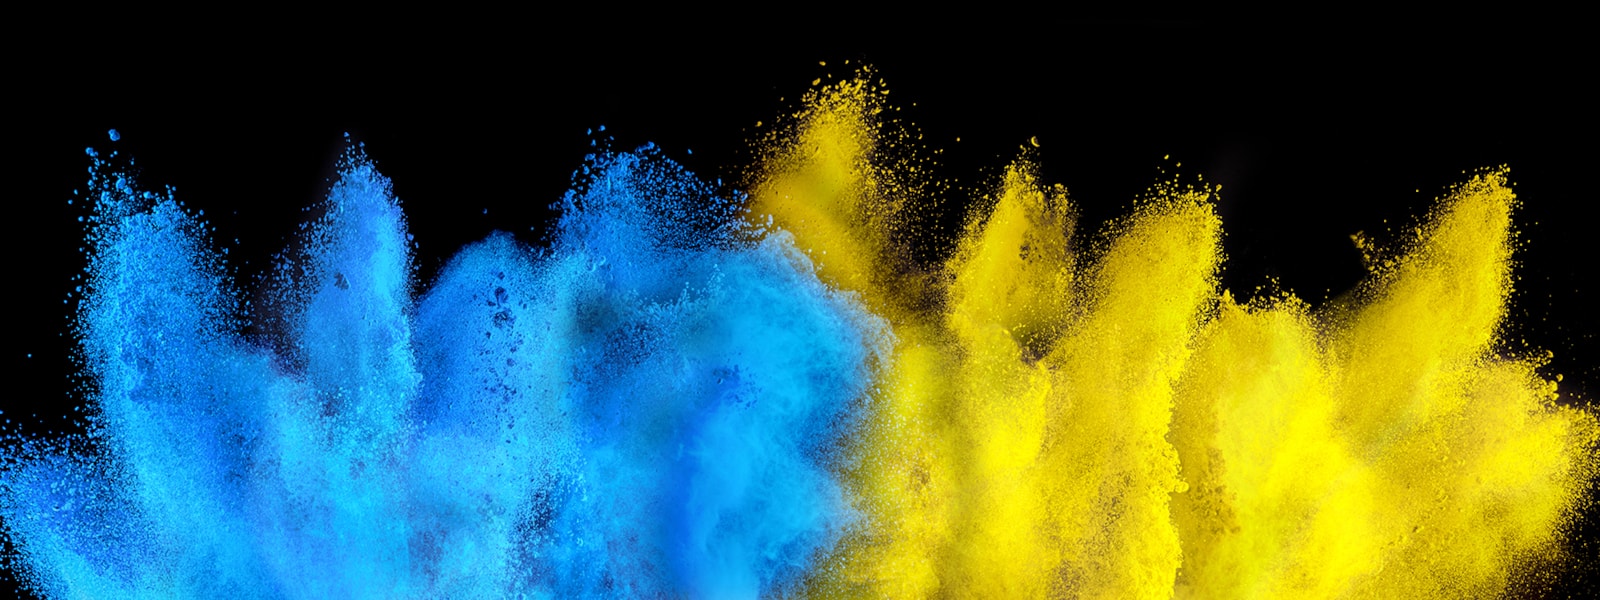 blue and yellow paint